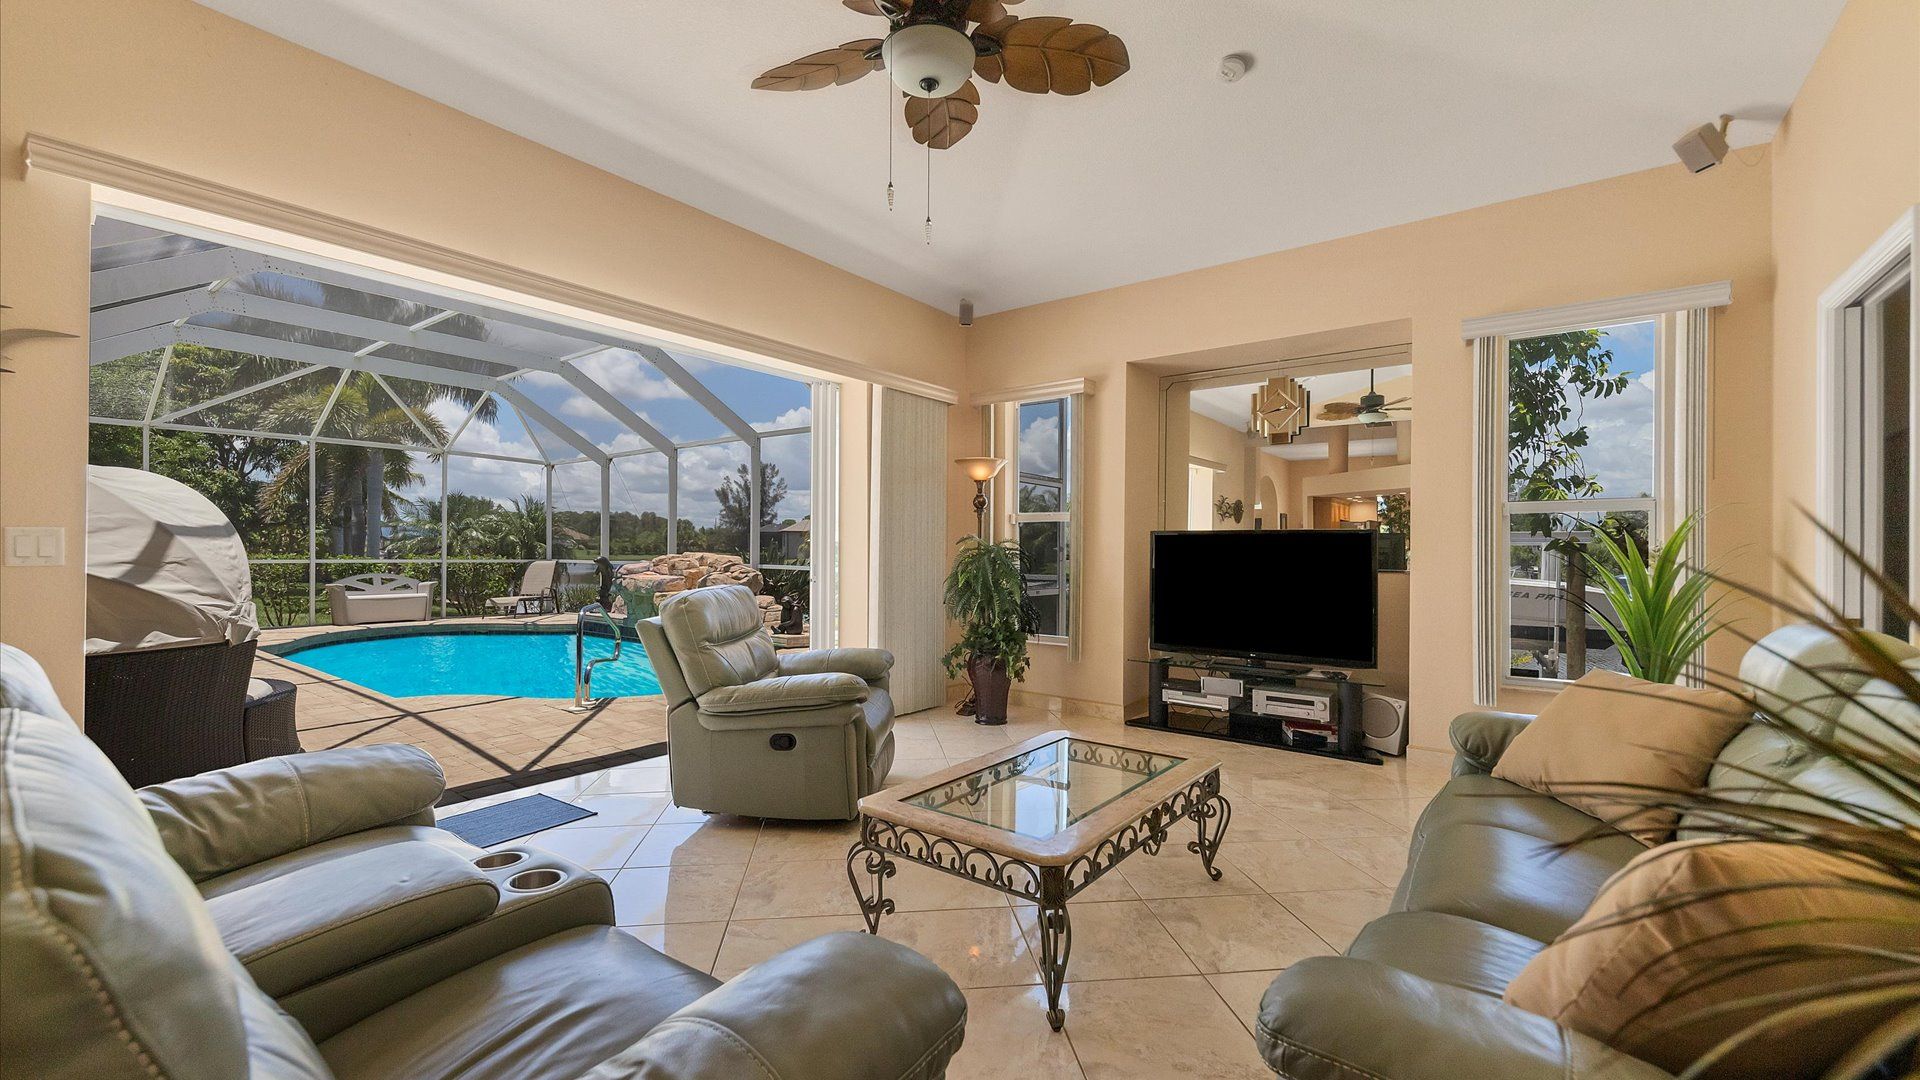 Relax on the comfortable couches in the living room, overlooking the pool and canal